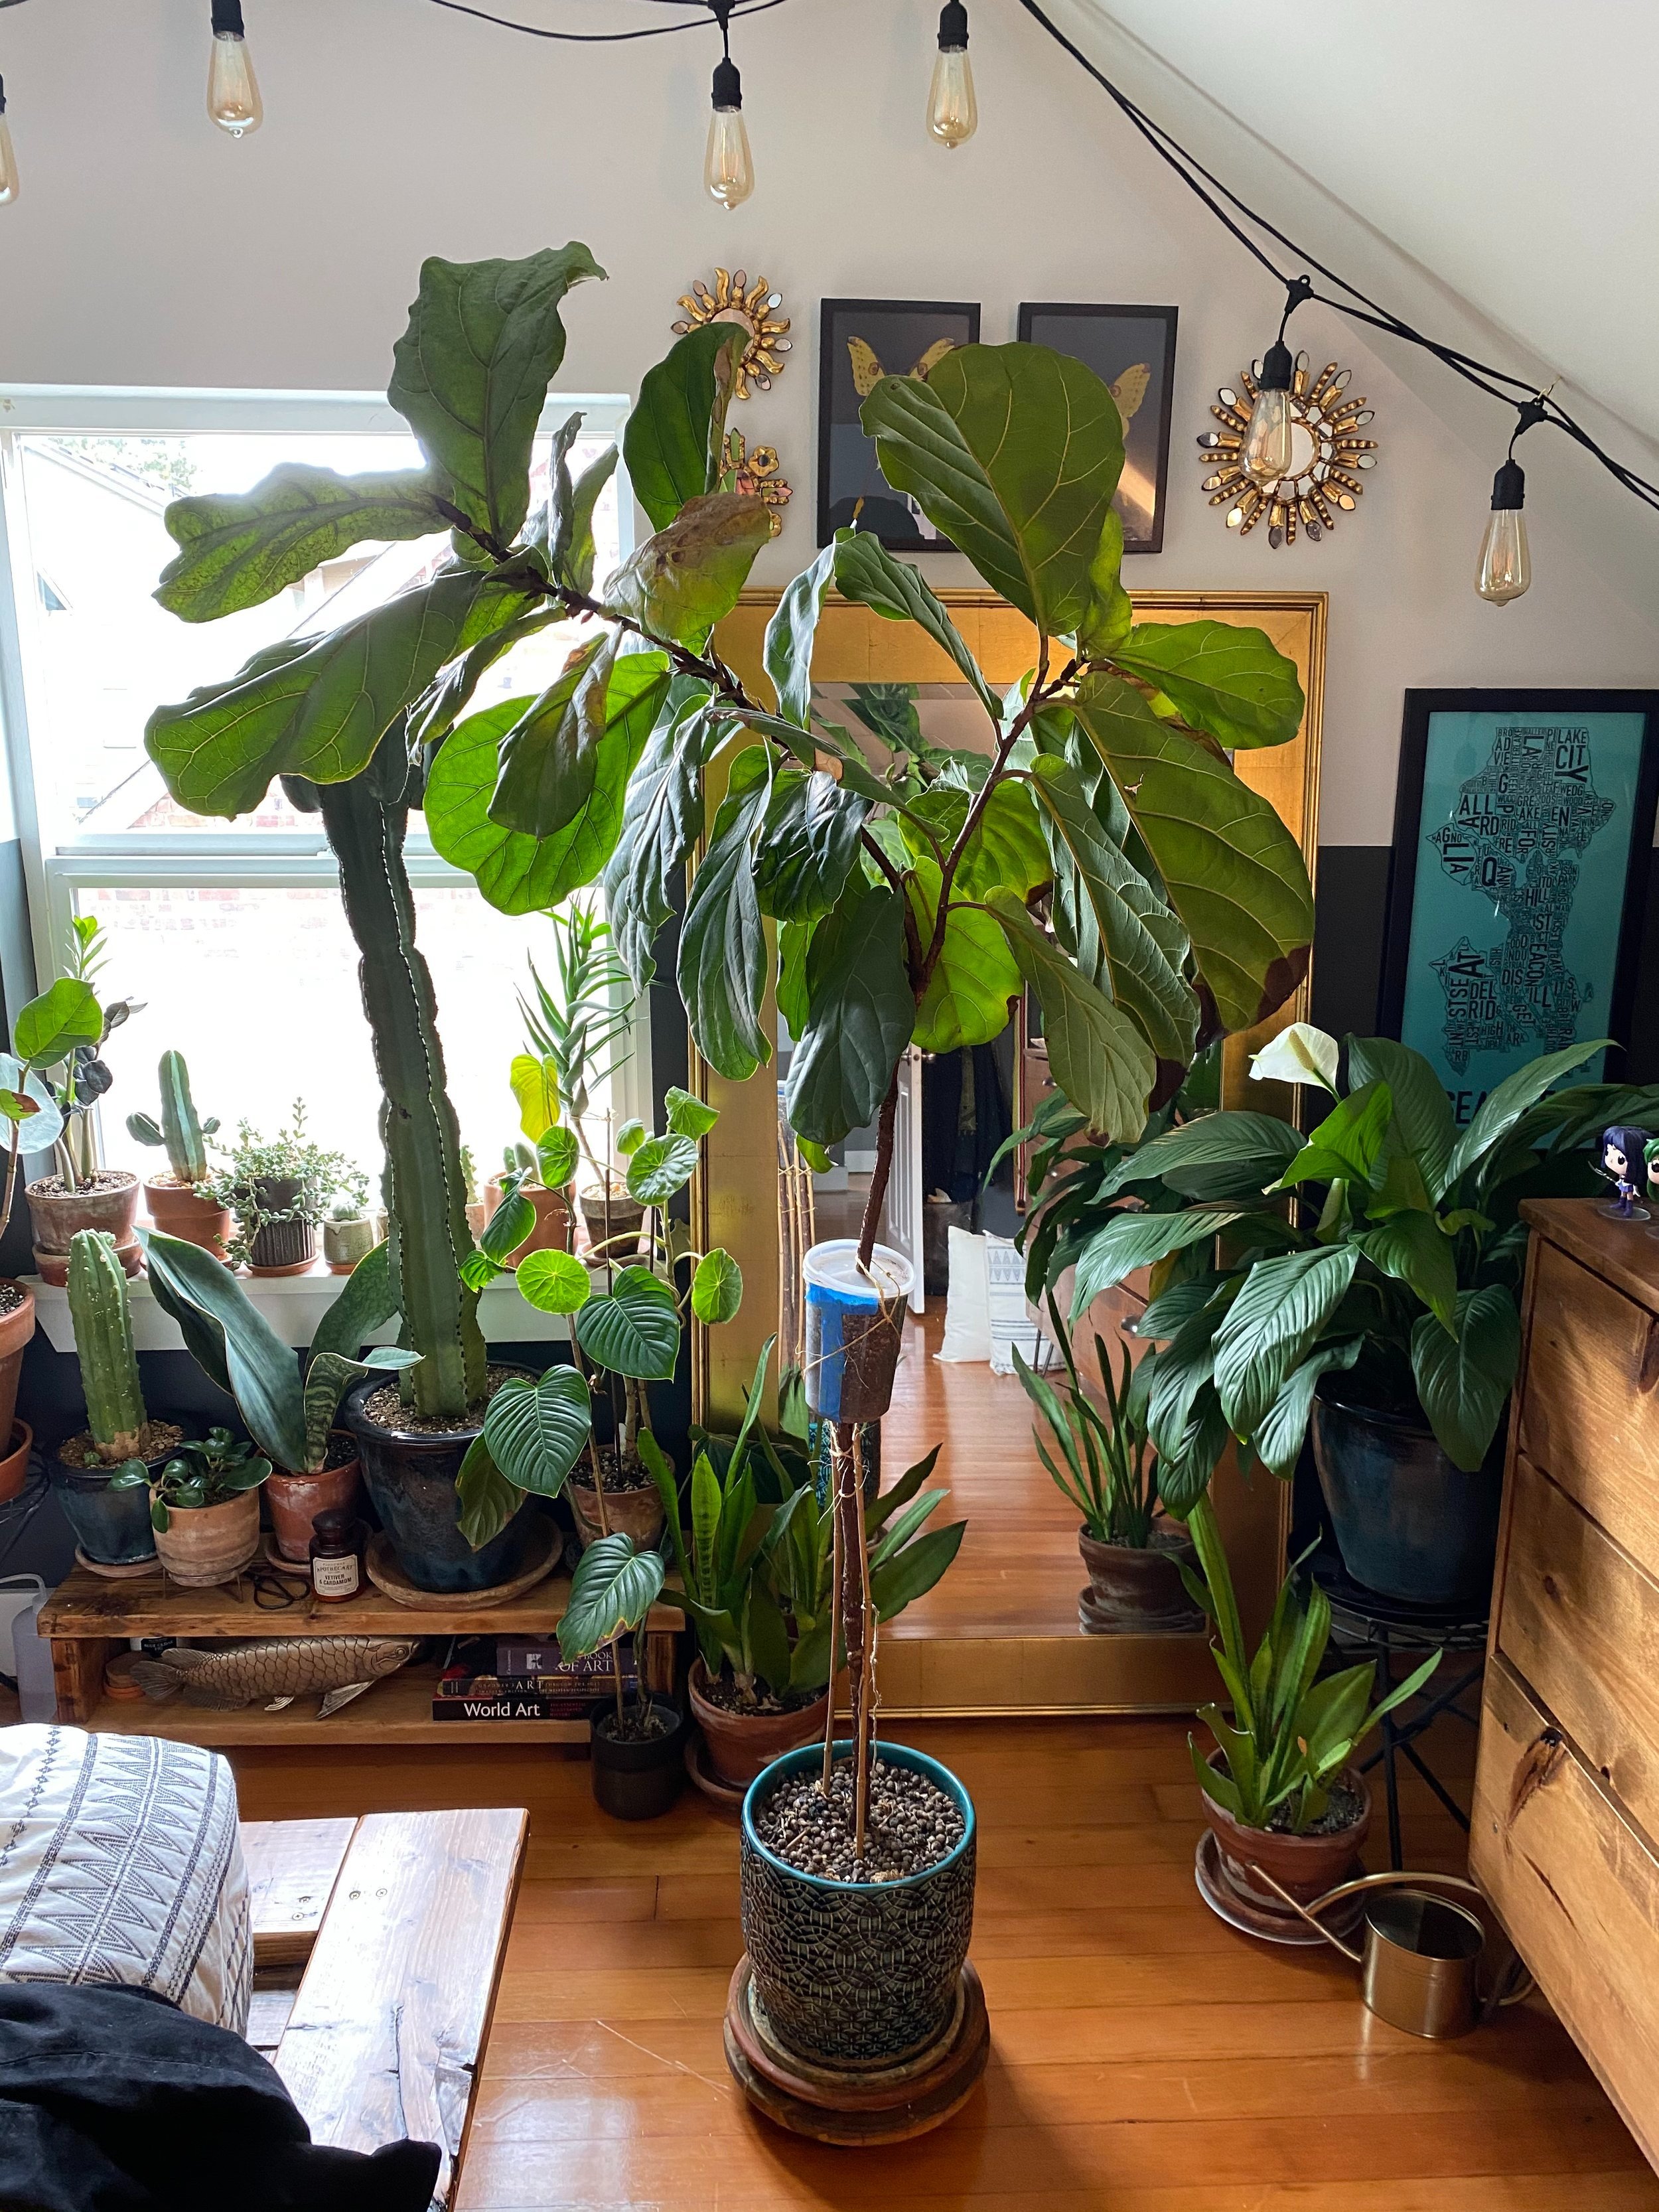  The Fiddle Leaf Fig ready to be chopped! 